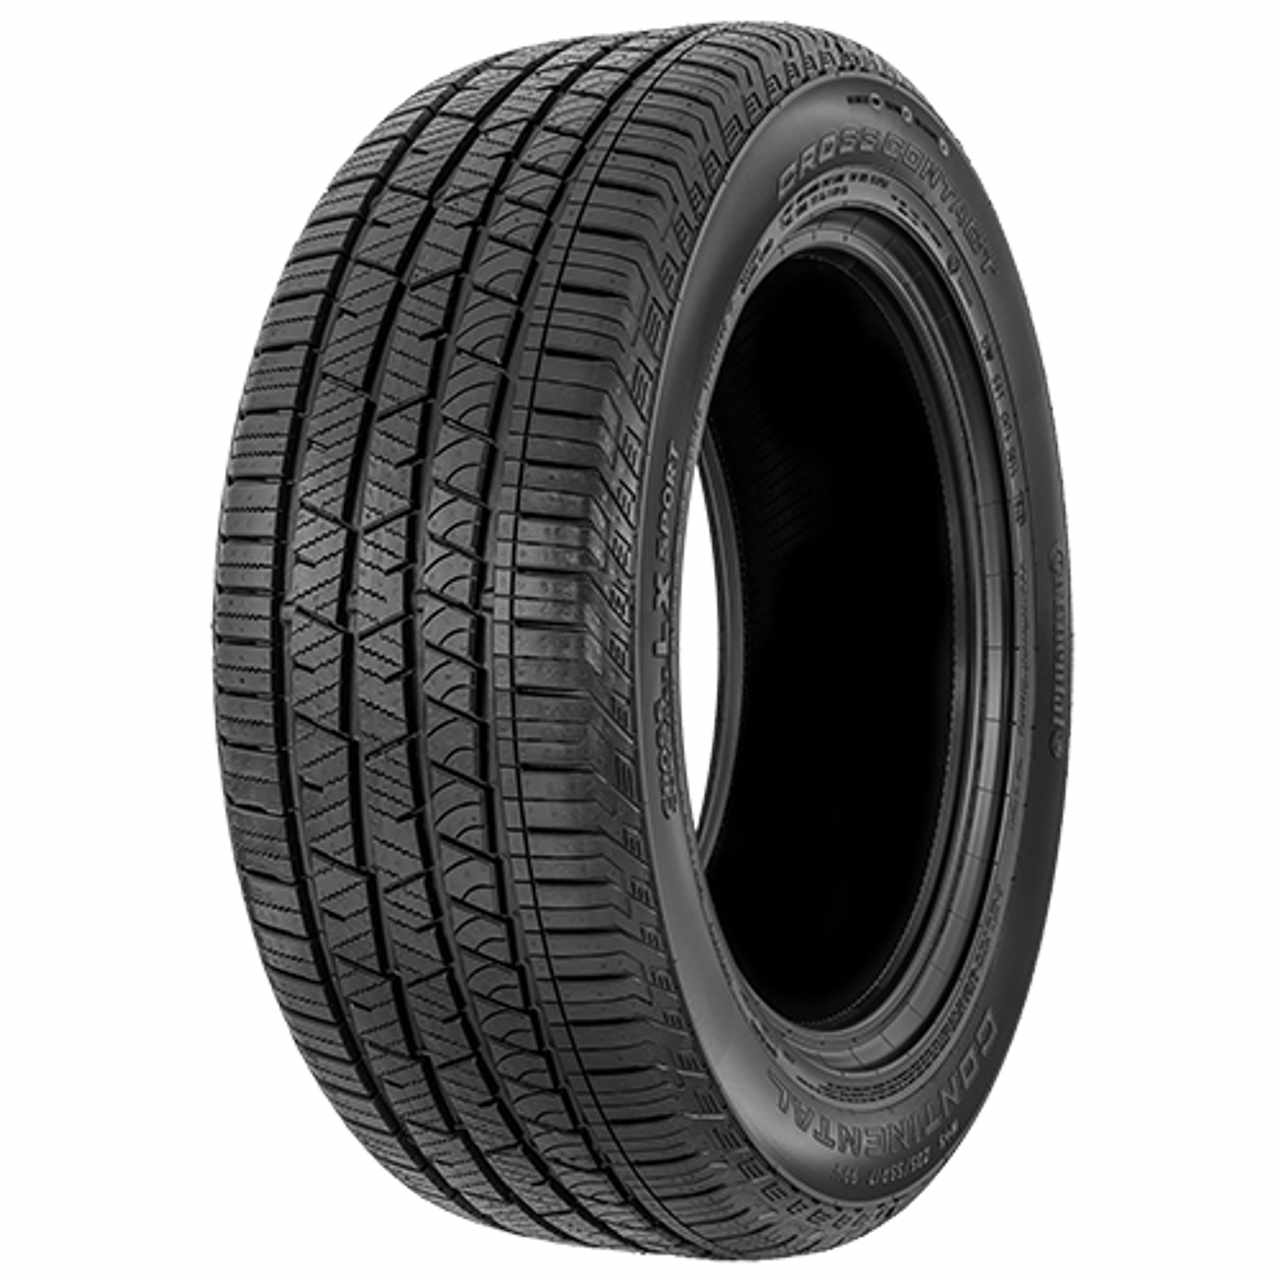 CONTINENTAL CROSSCONTACT LX SPORT (AO) (EVc) 235/50R18 97H FR BSW